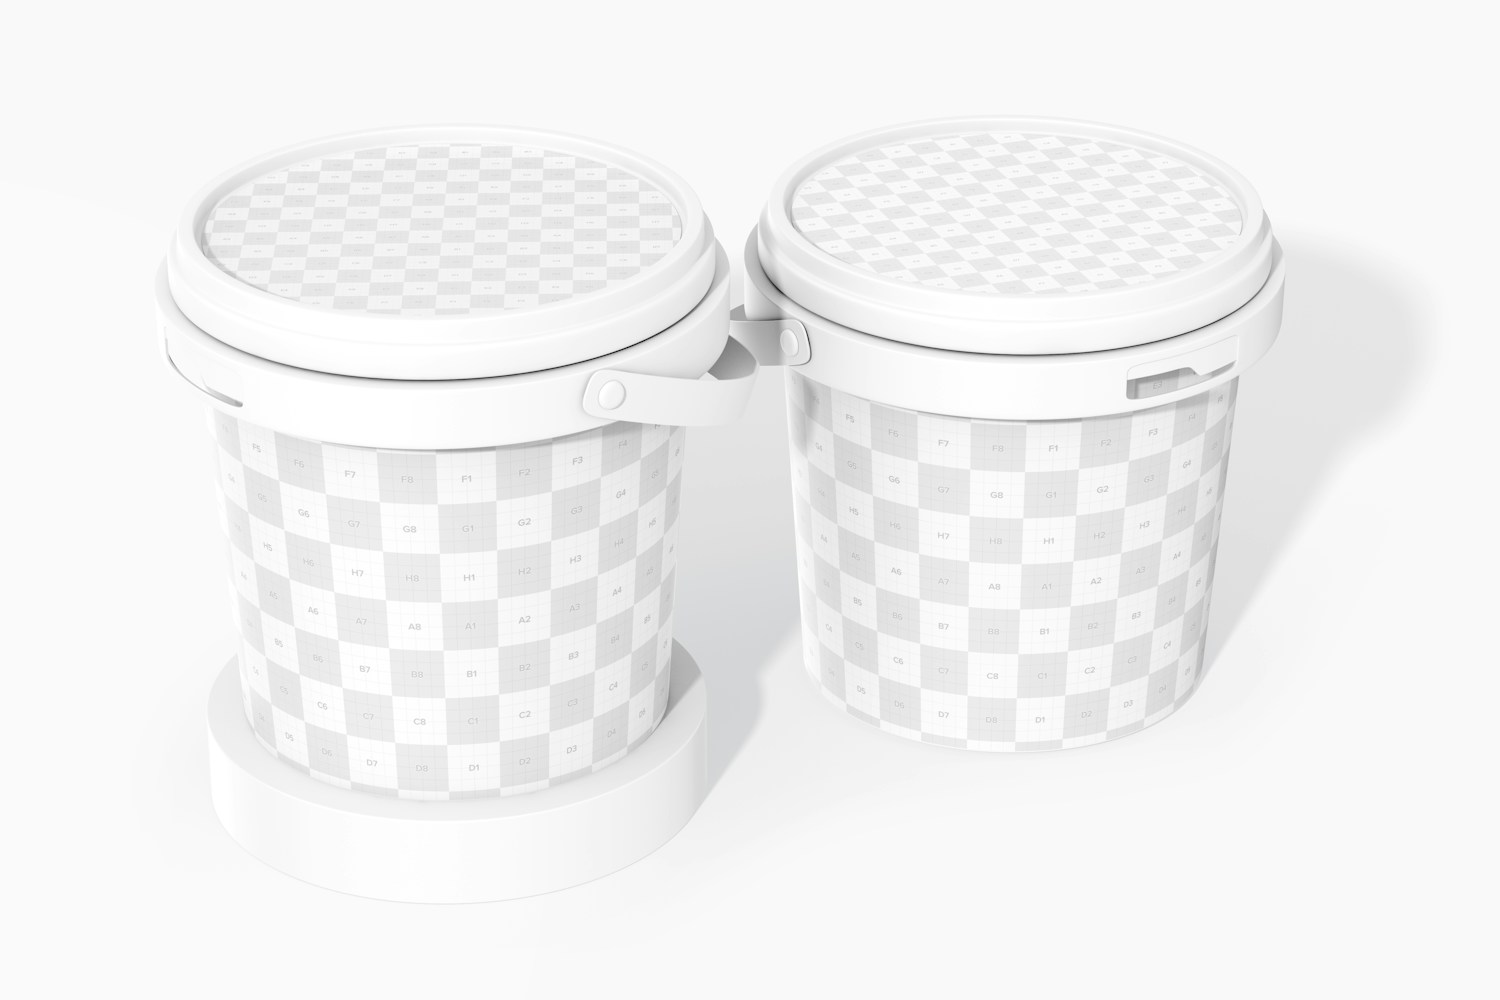 1000 ml Plastic Containers Mockup, Front View